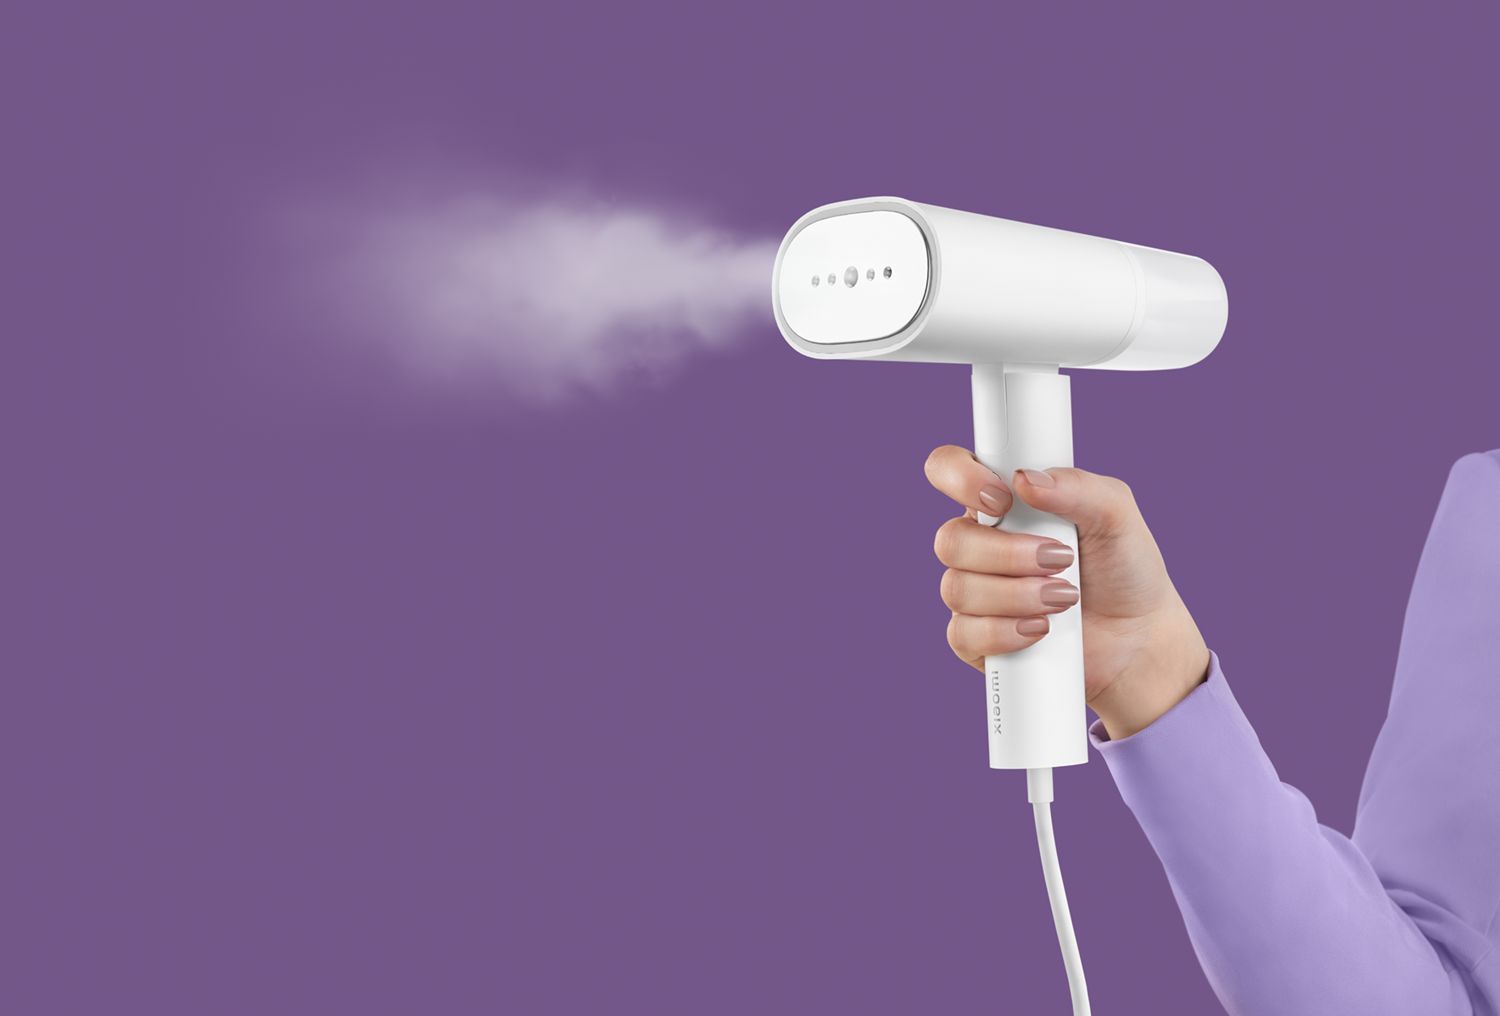 Xiaomi Handheld Garment Steamer is designed for ease of use,